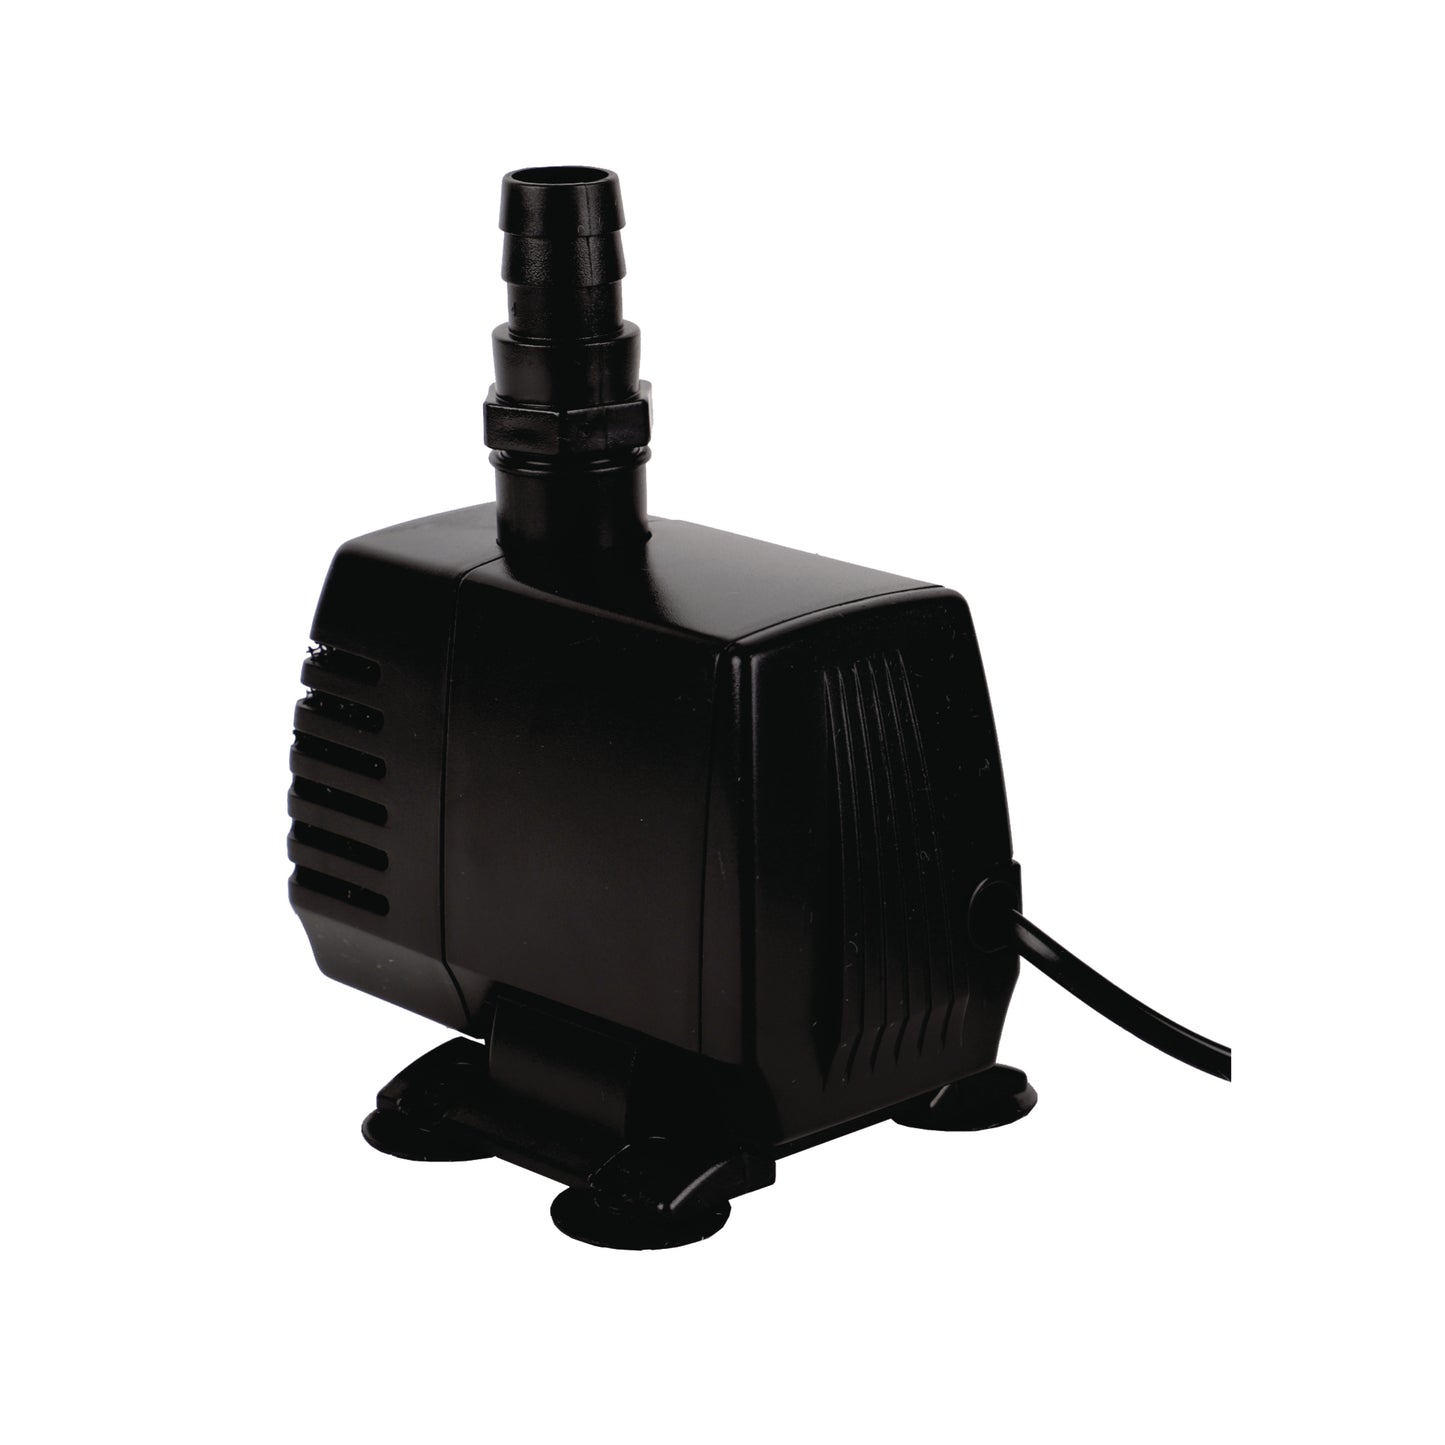 Waterfall Pumps - Pond or Fountain Submersible - Water Pump - 1500L/h - 3m